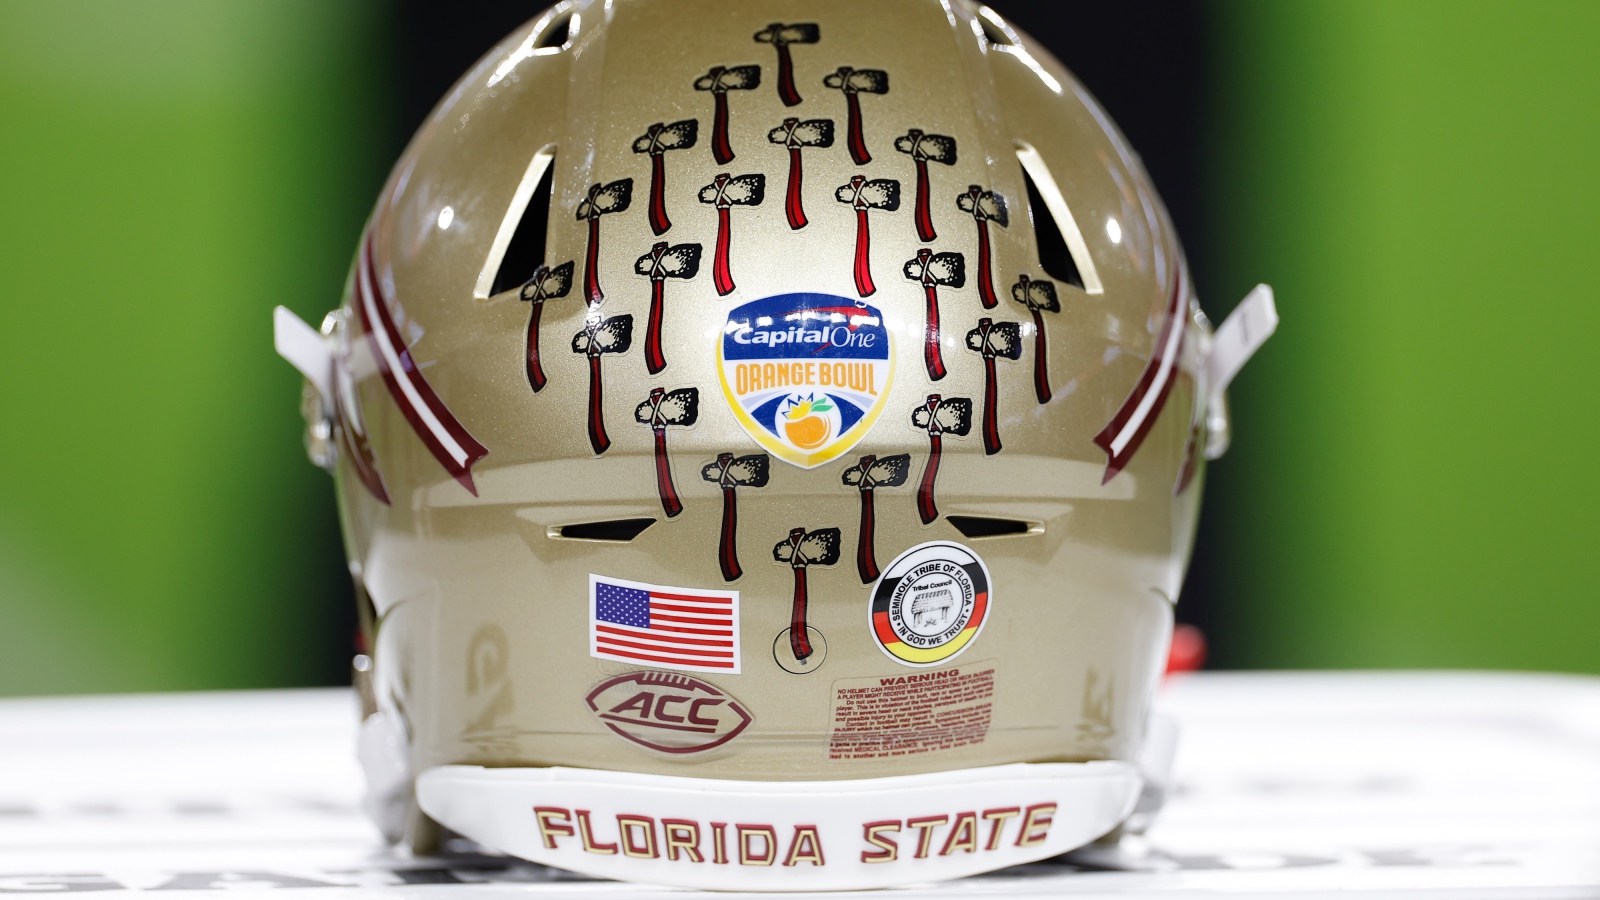 Florida State Football helmet with ACC logo